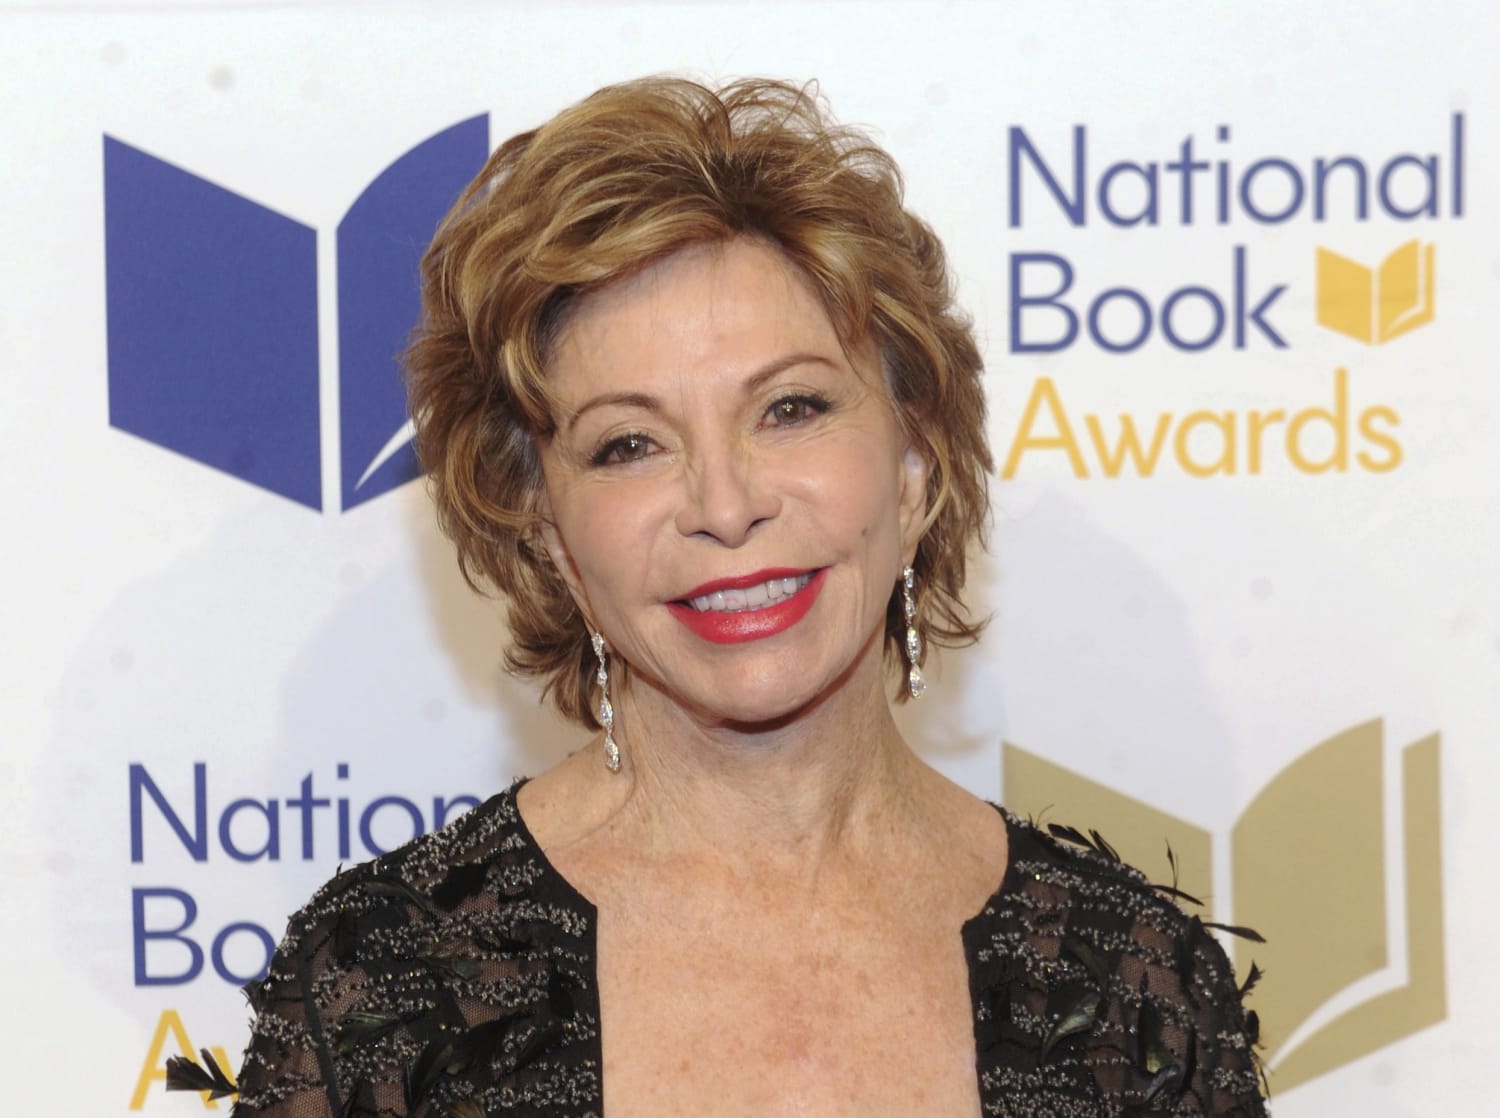 Isabel Allende is first Spanish-language writer to receive honorary National Book Award medal